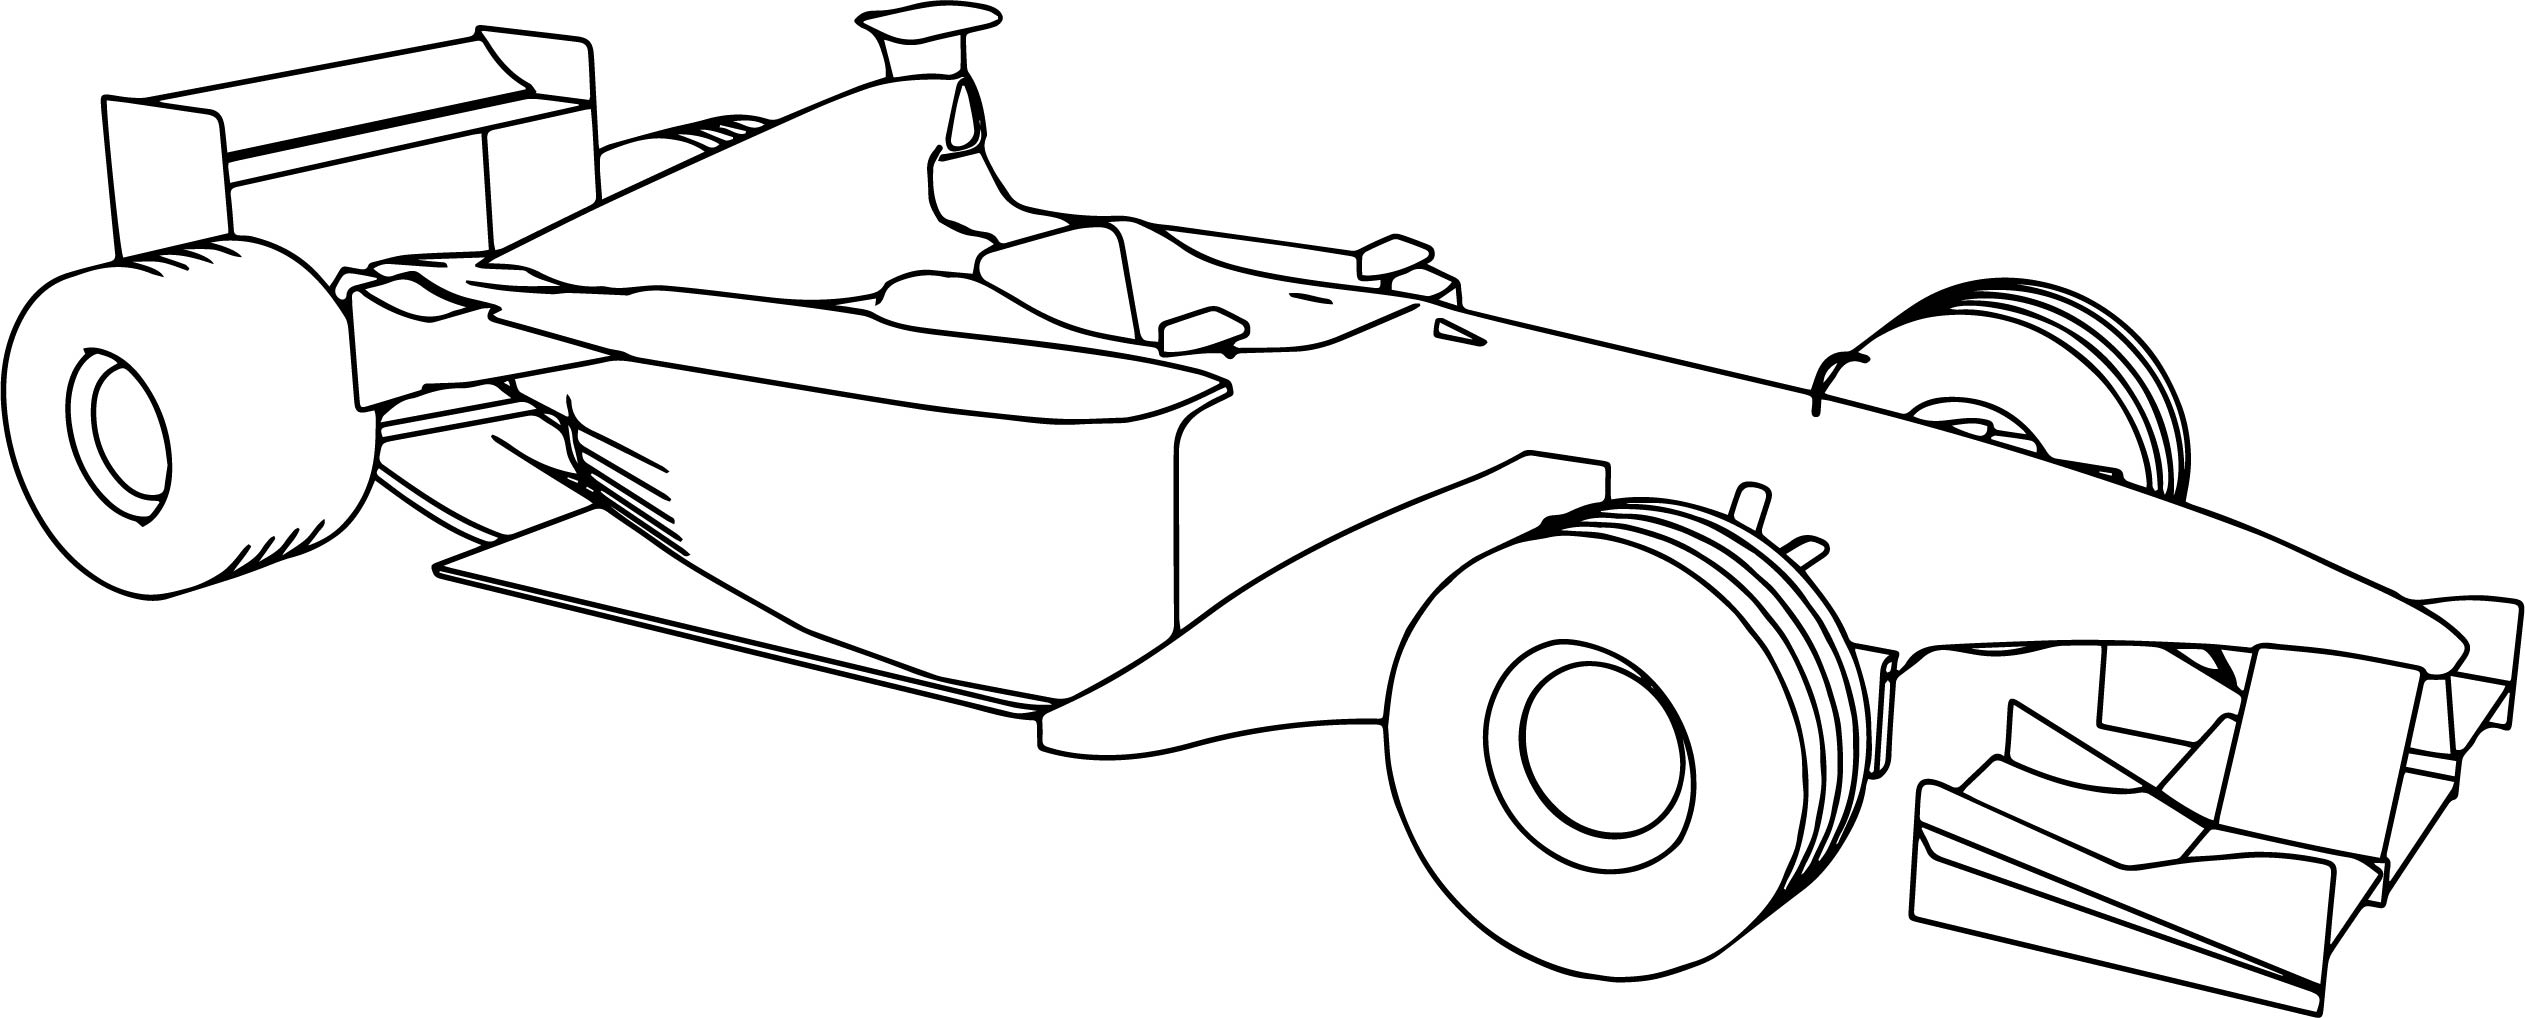 Drag Car Coloring Pages Race Car Coloring Page Book Printables Drag Formula 1 For Adults